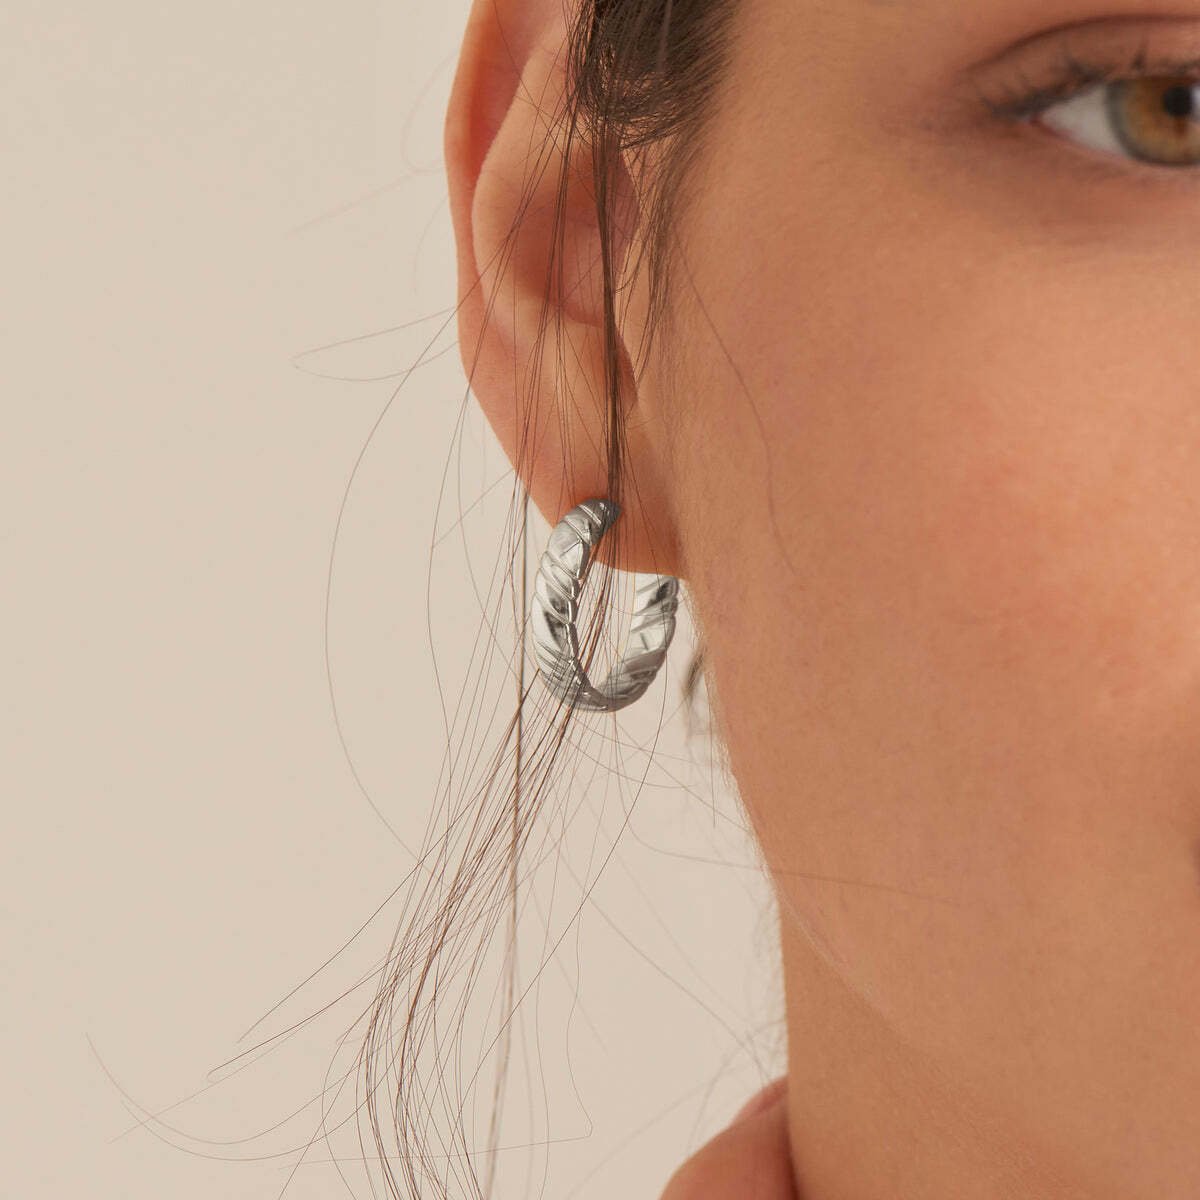 8 Artificial Earrings For Daily And Office Wear - Tradeindia